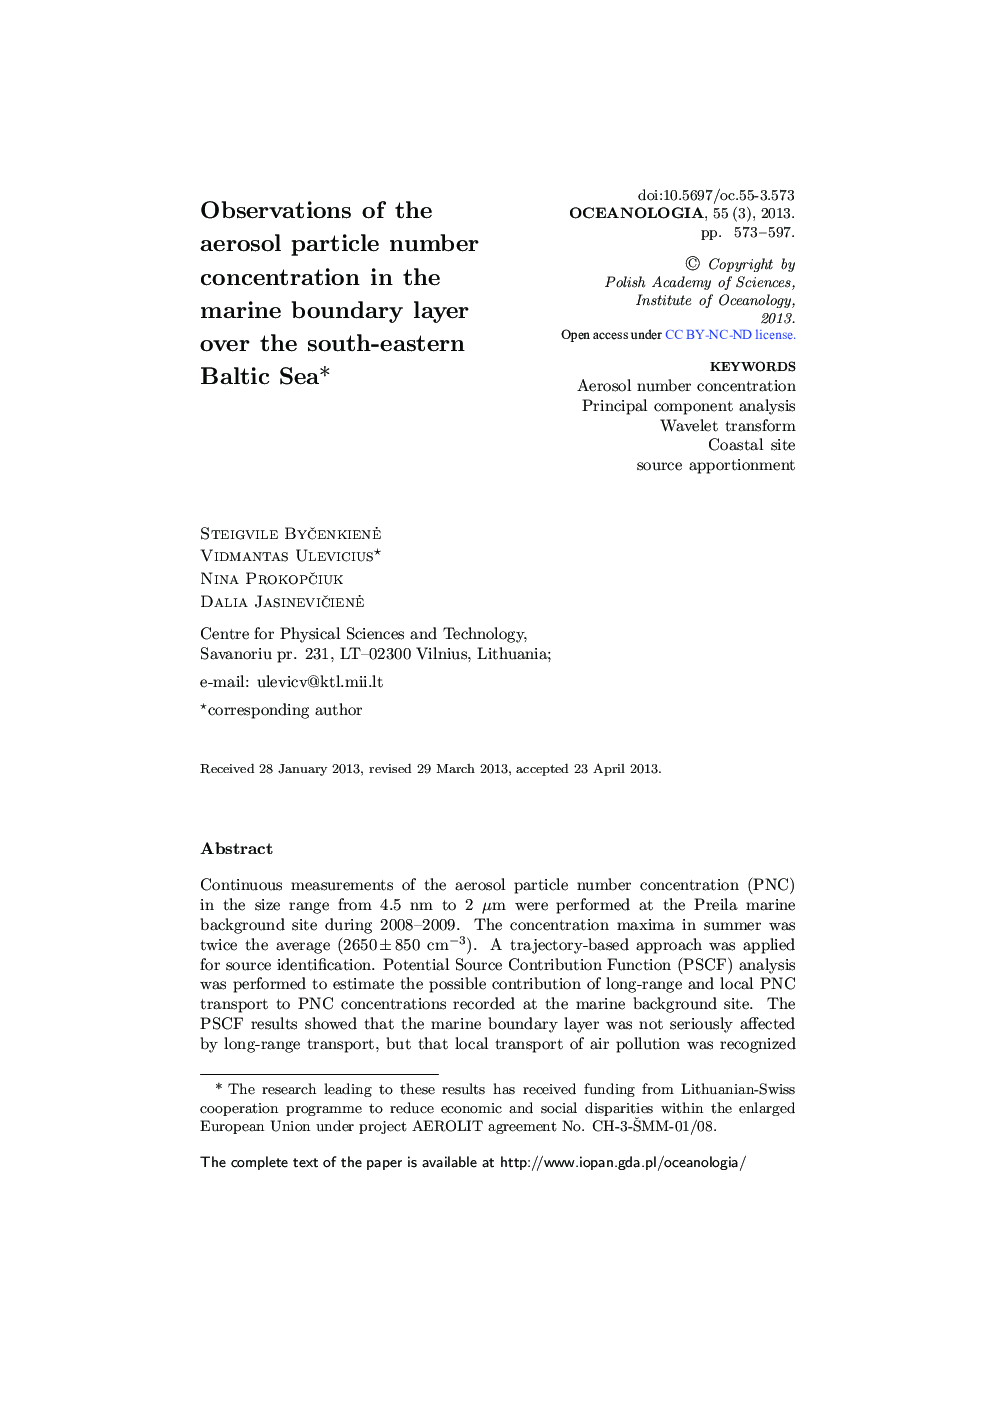 Observations of the aerosol particle number concentration in the marine boundary layer over the south-eastern Baltic Sea* 